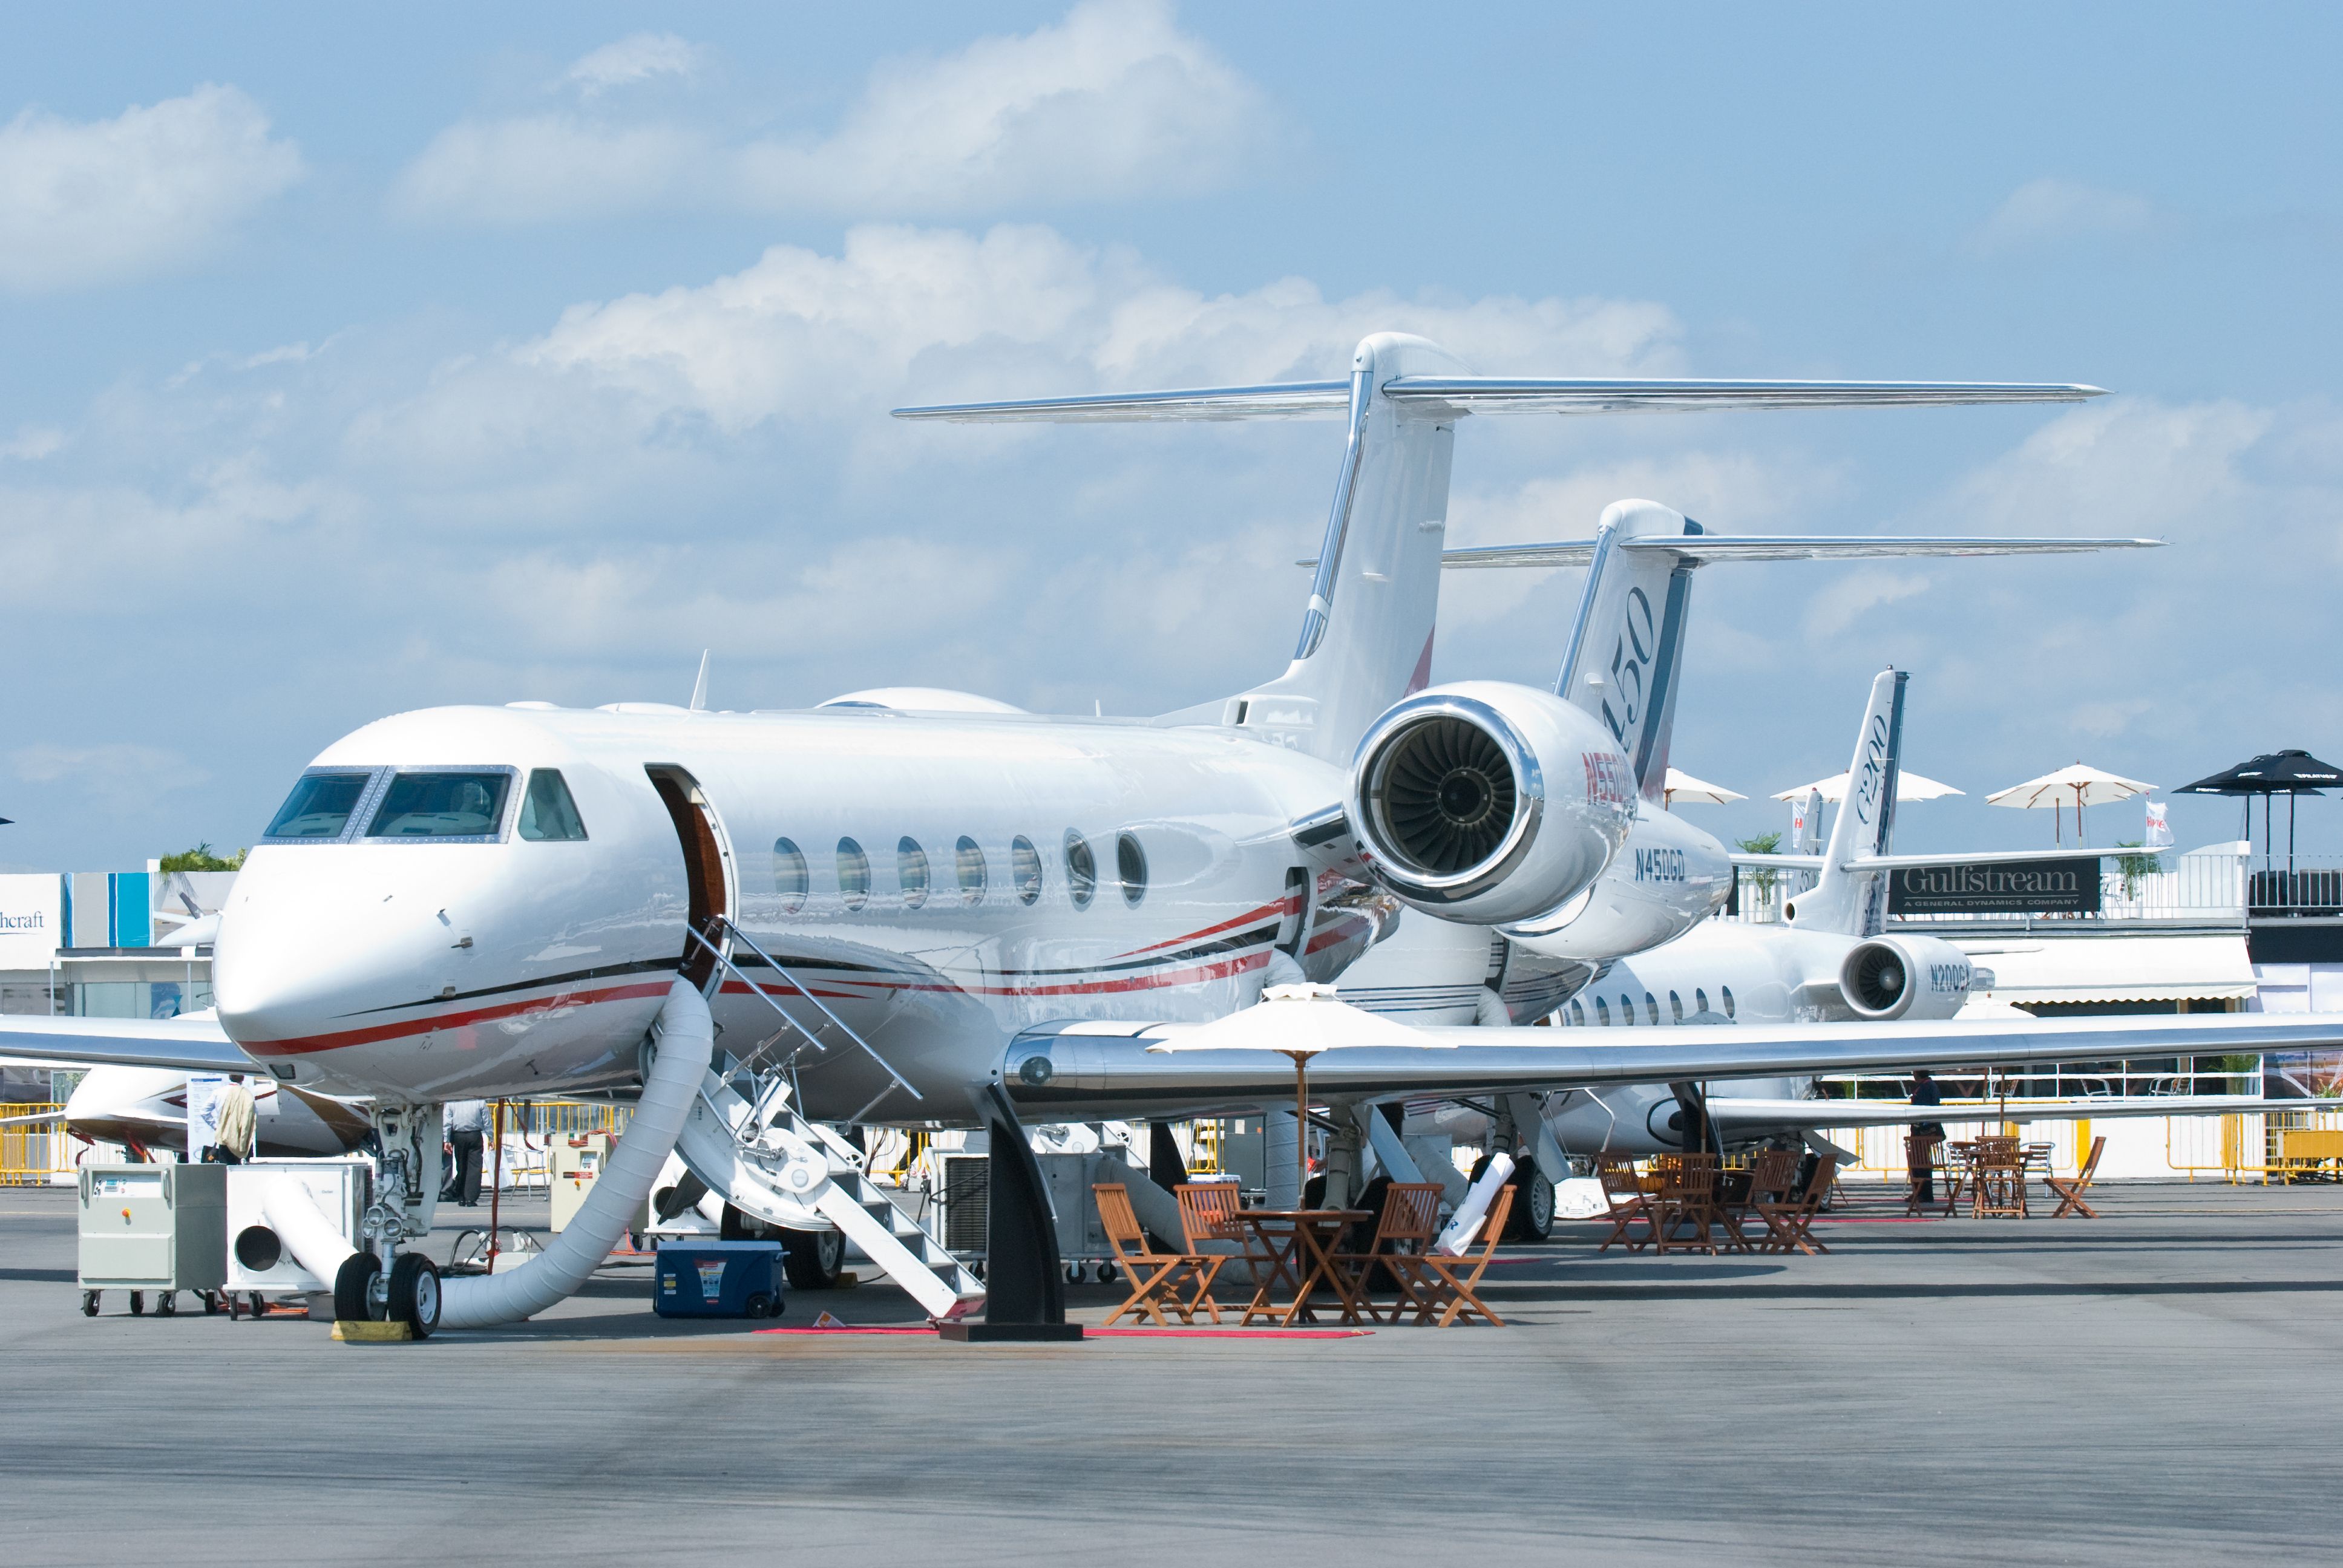 Multiple Gulfstream business jets at Singapore Airshow 2010.